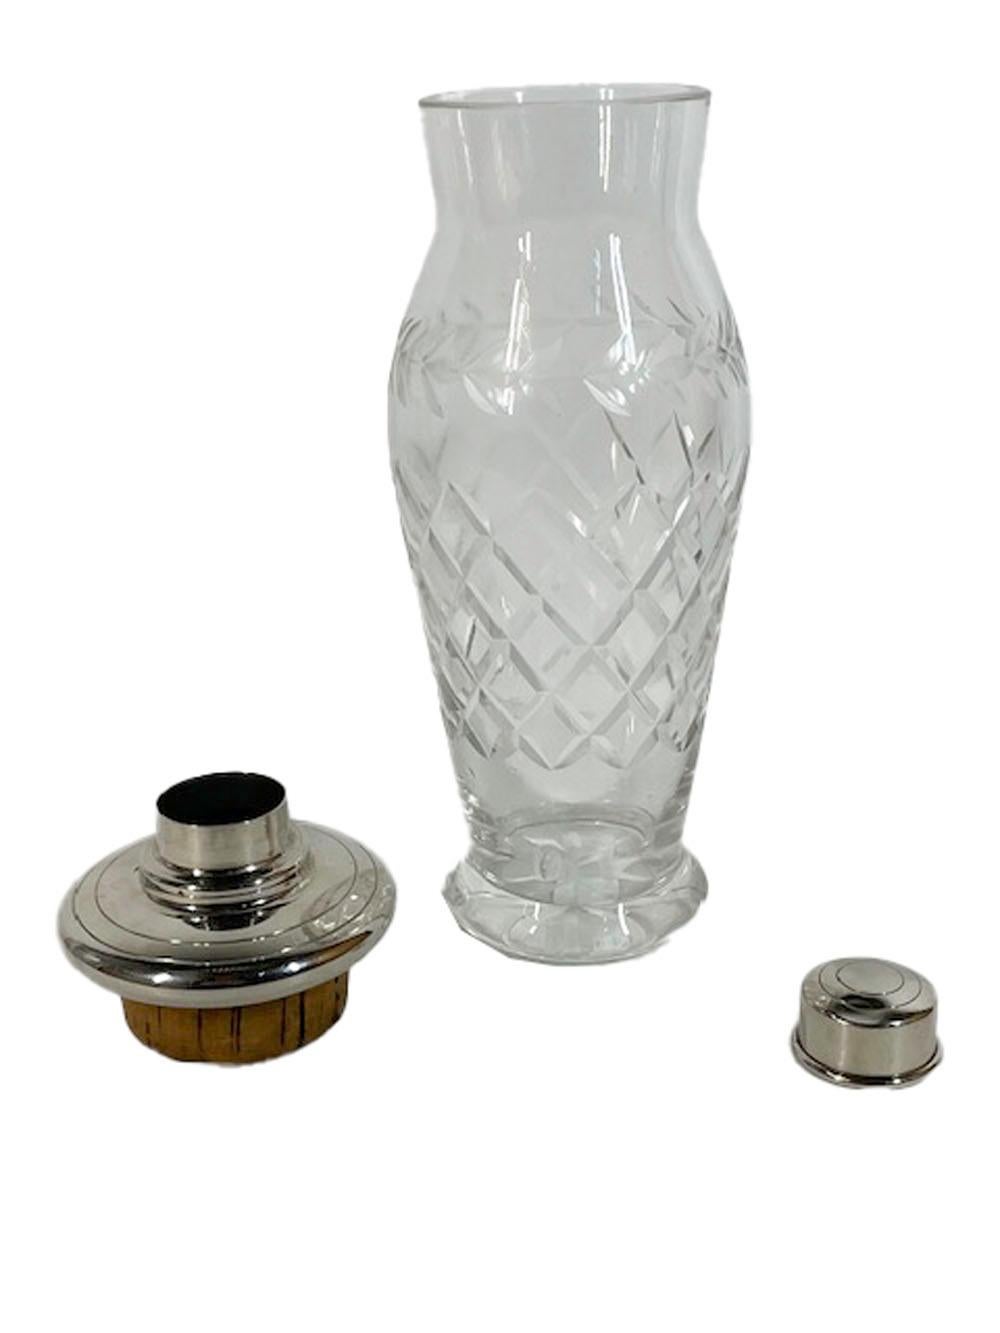 Art Deco Cut Glass Cocktail Shaker with Silver Plate Lid In Good Condition For Sale In Nantucket, MA